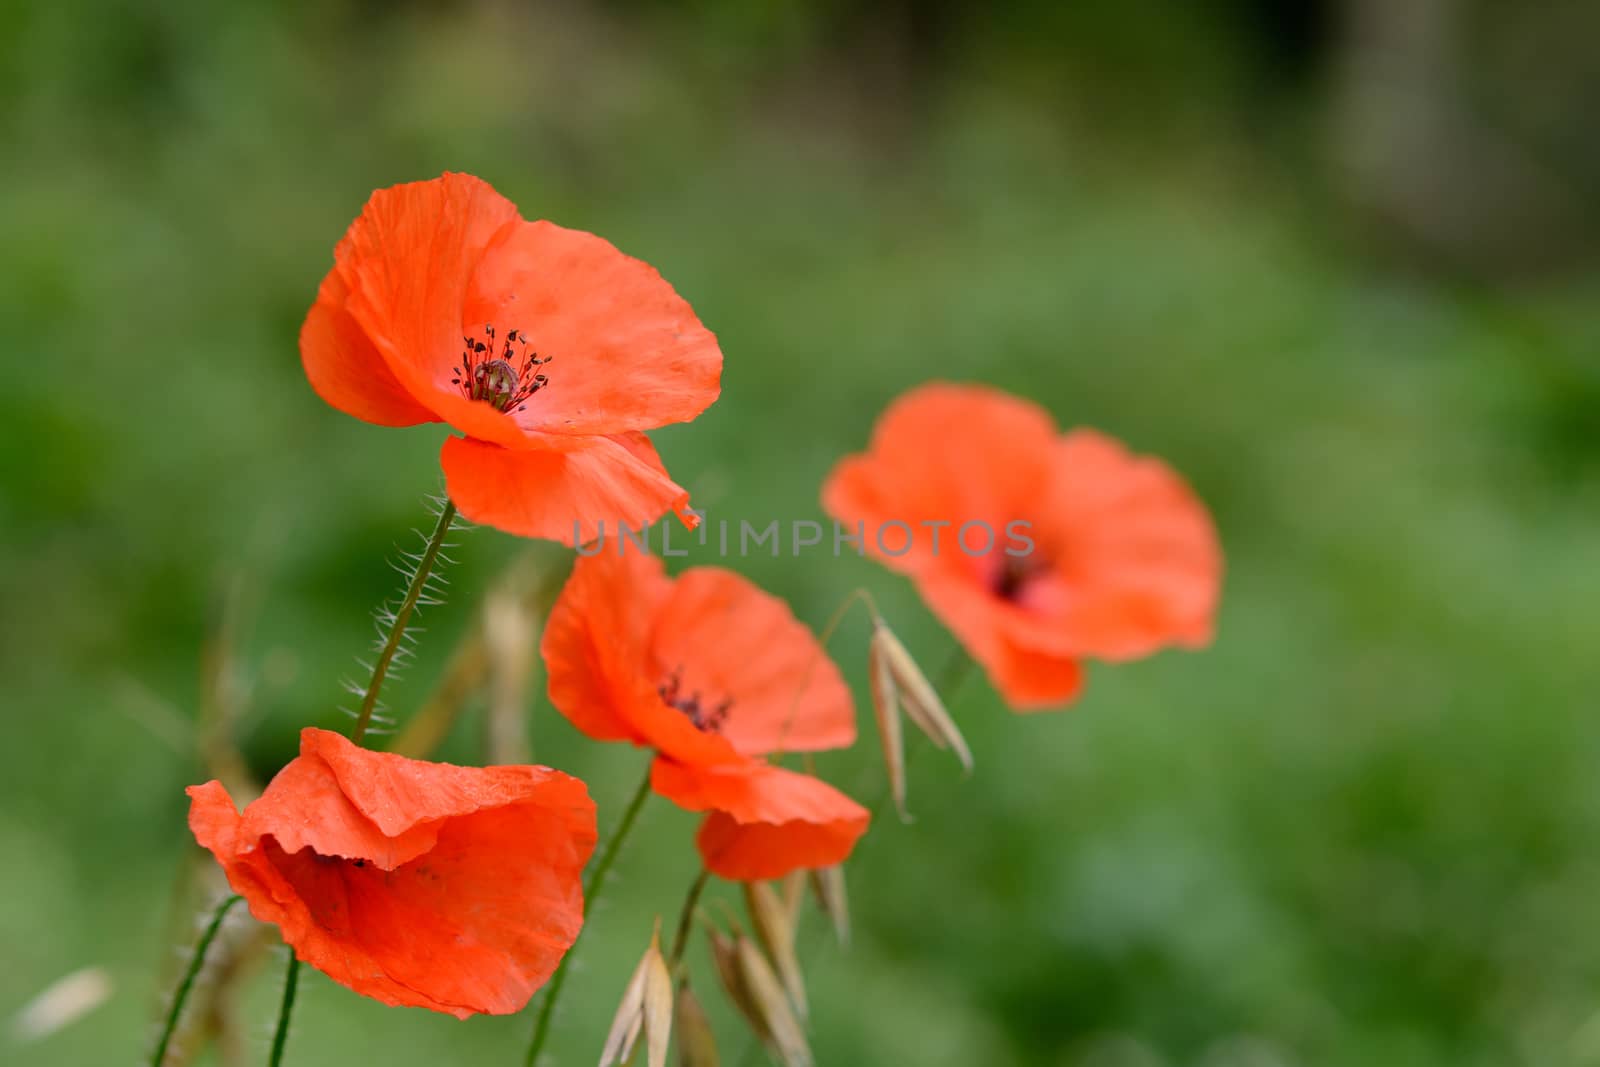 Closeup view of red poppies from side angle